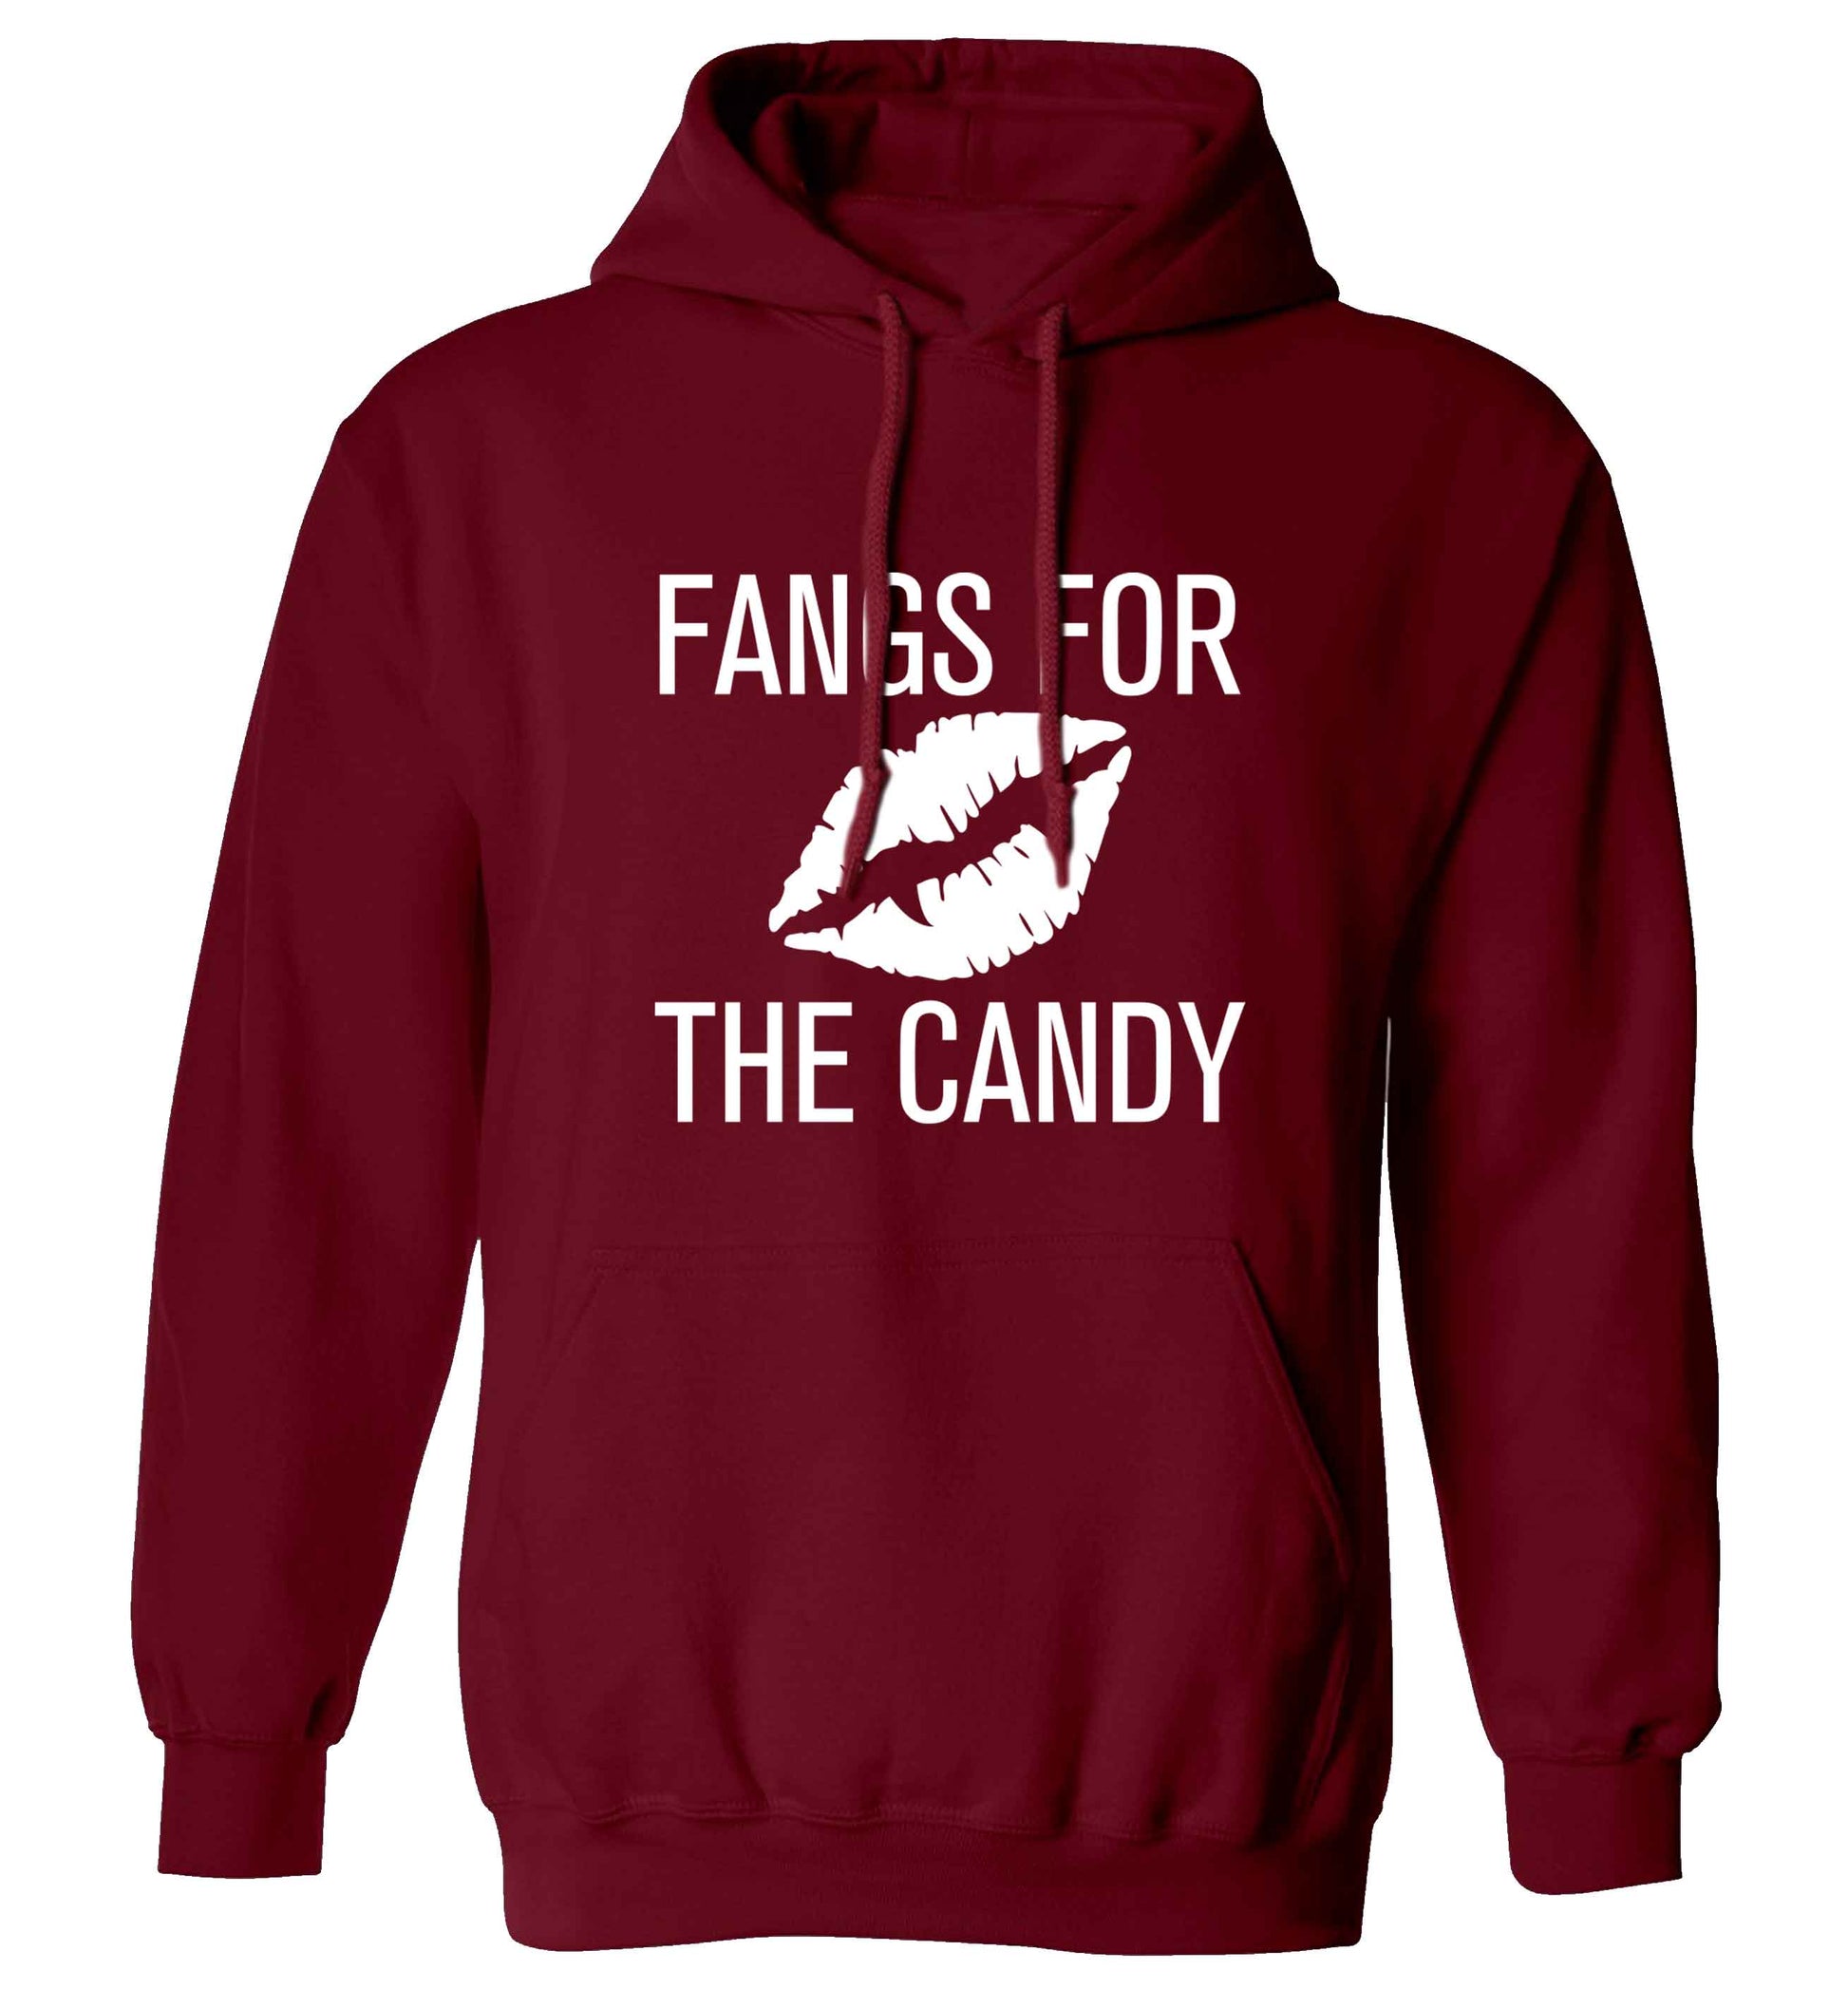 Fangs for the candy adults unisex maroon hoodie 2XL